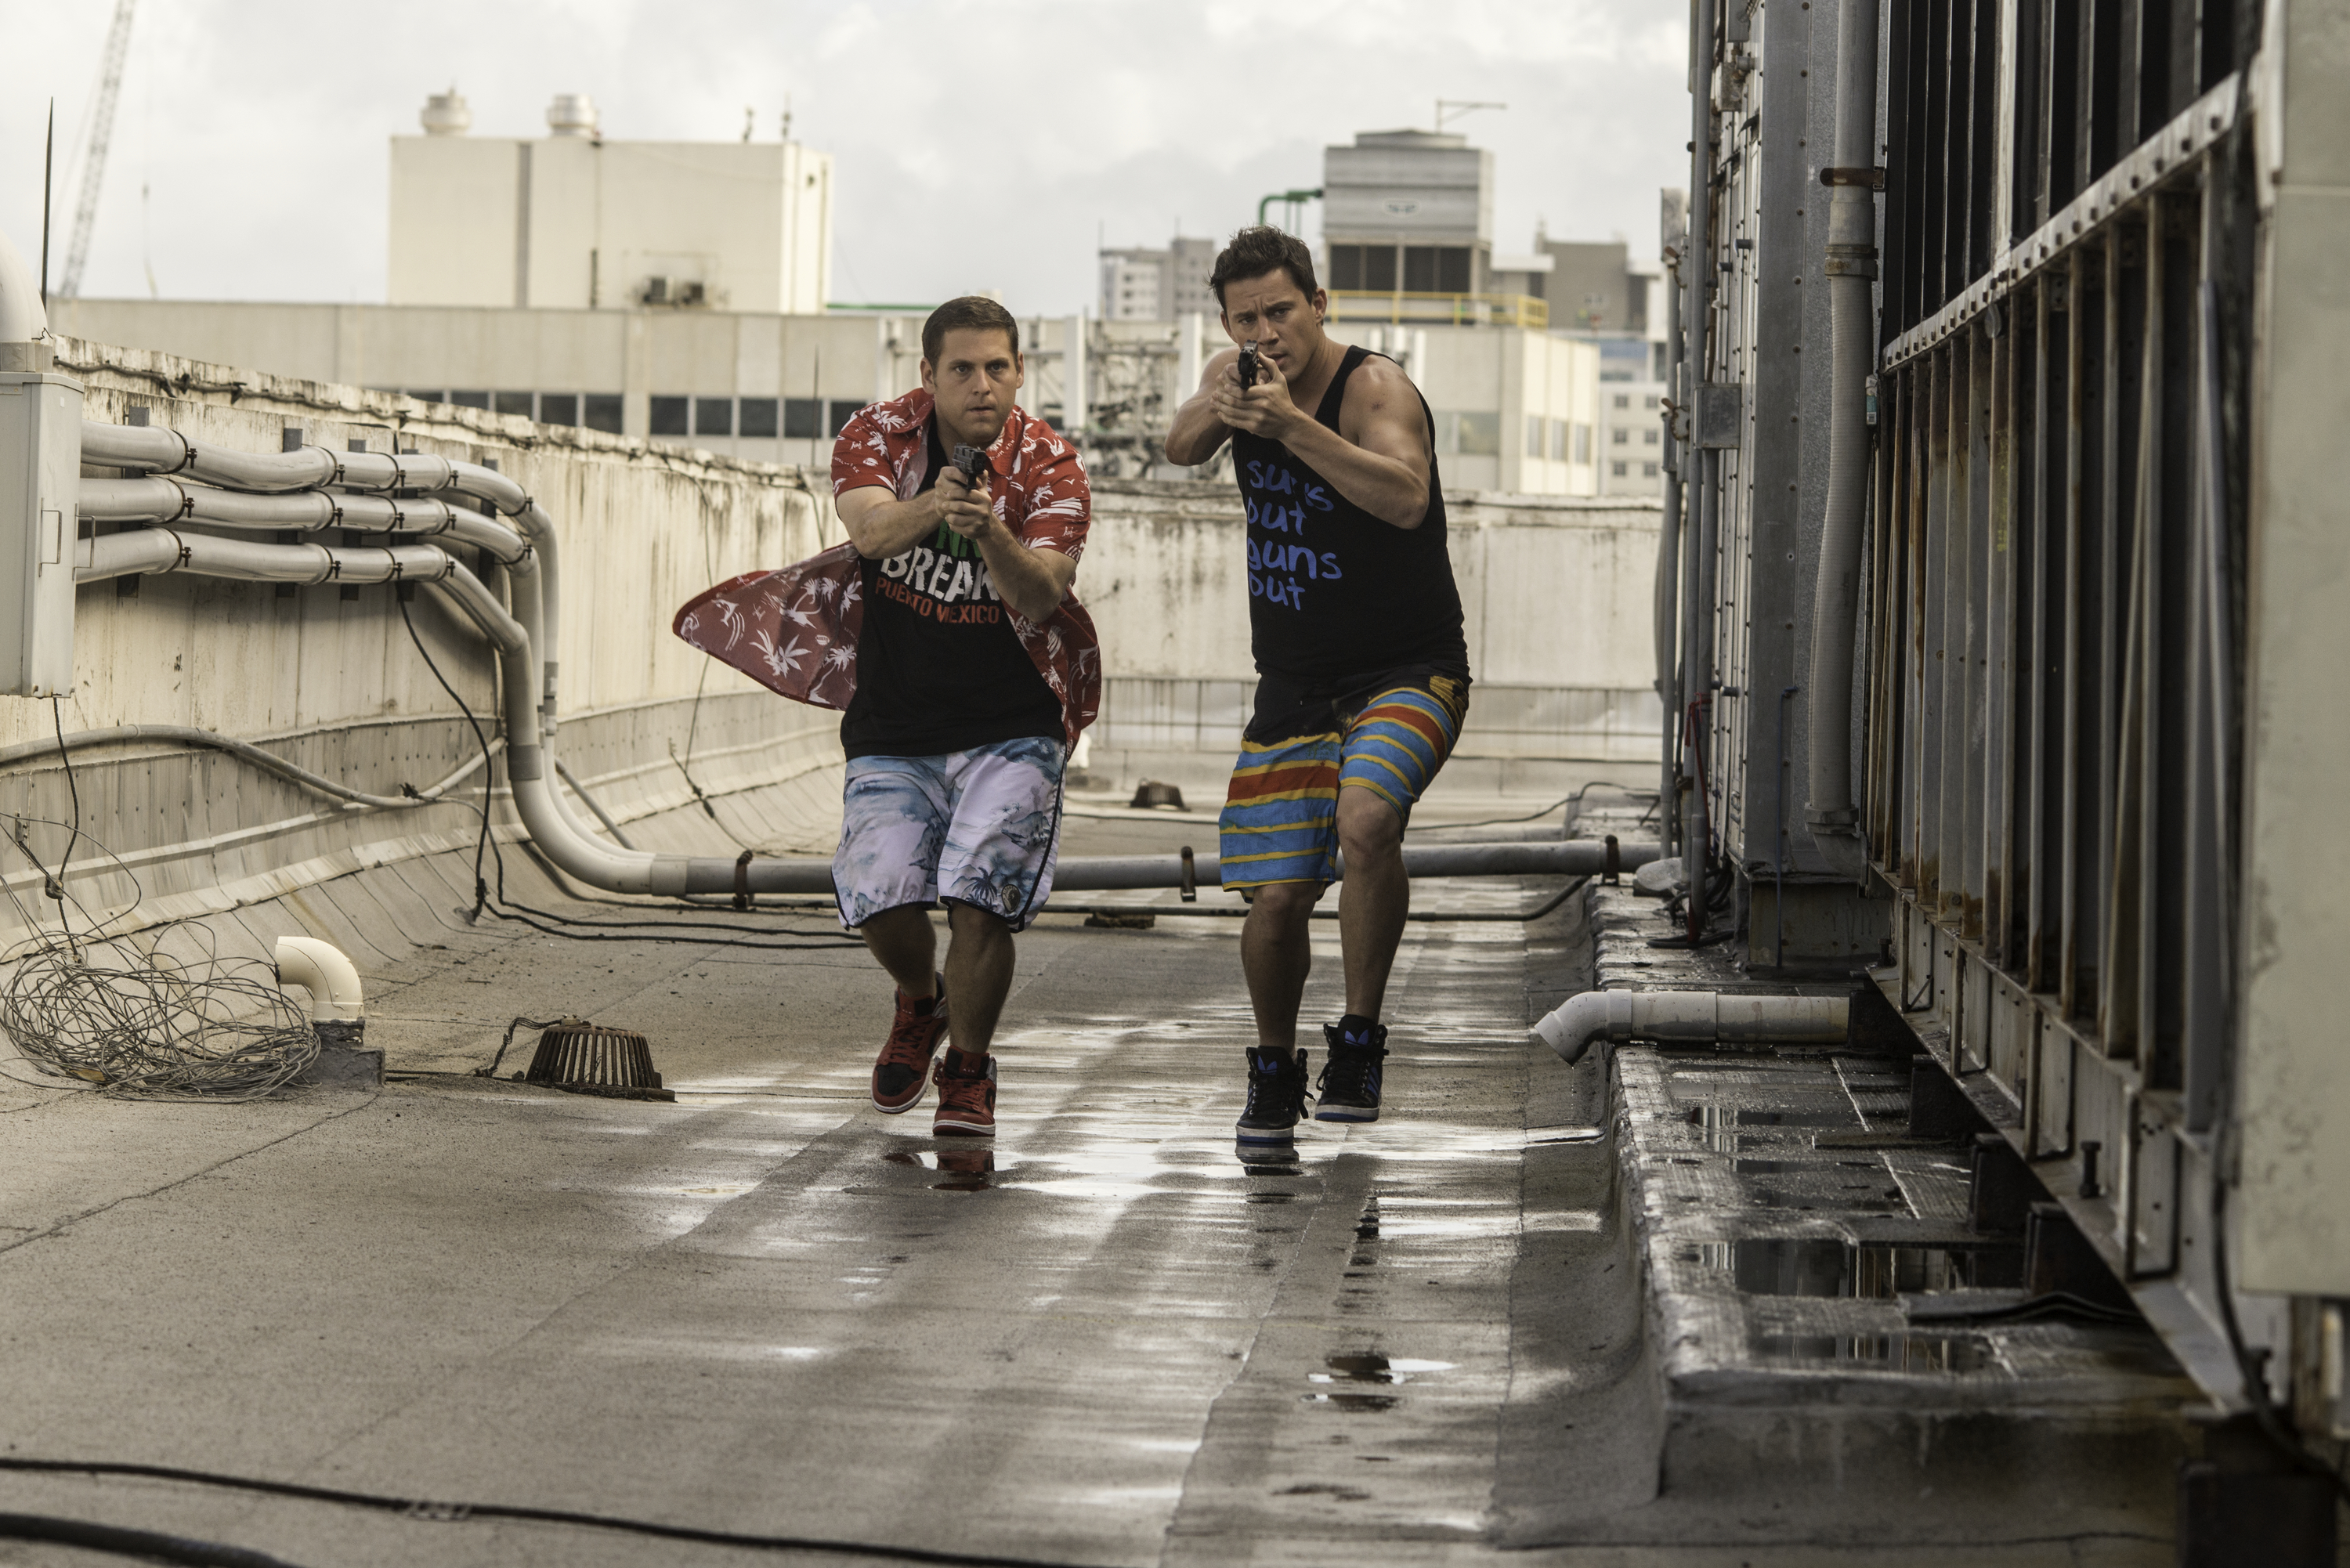 Jonah Hill, left, and Channing Tatum in "22 Jump Street." (Photo: Sony Pictures)